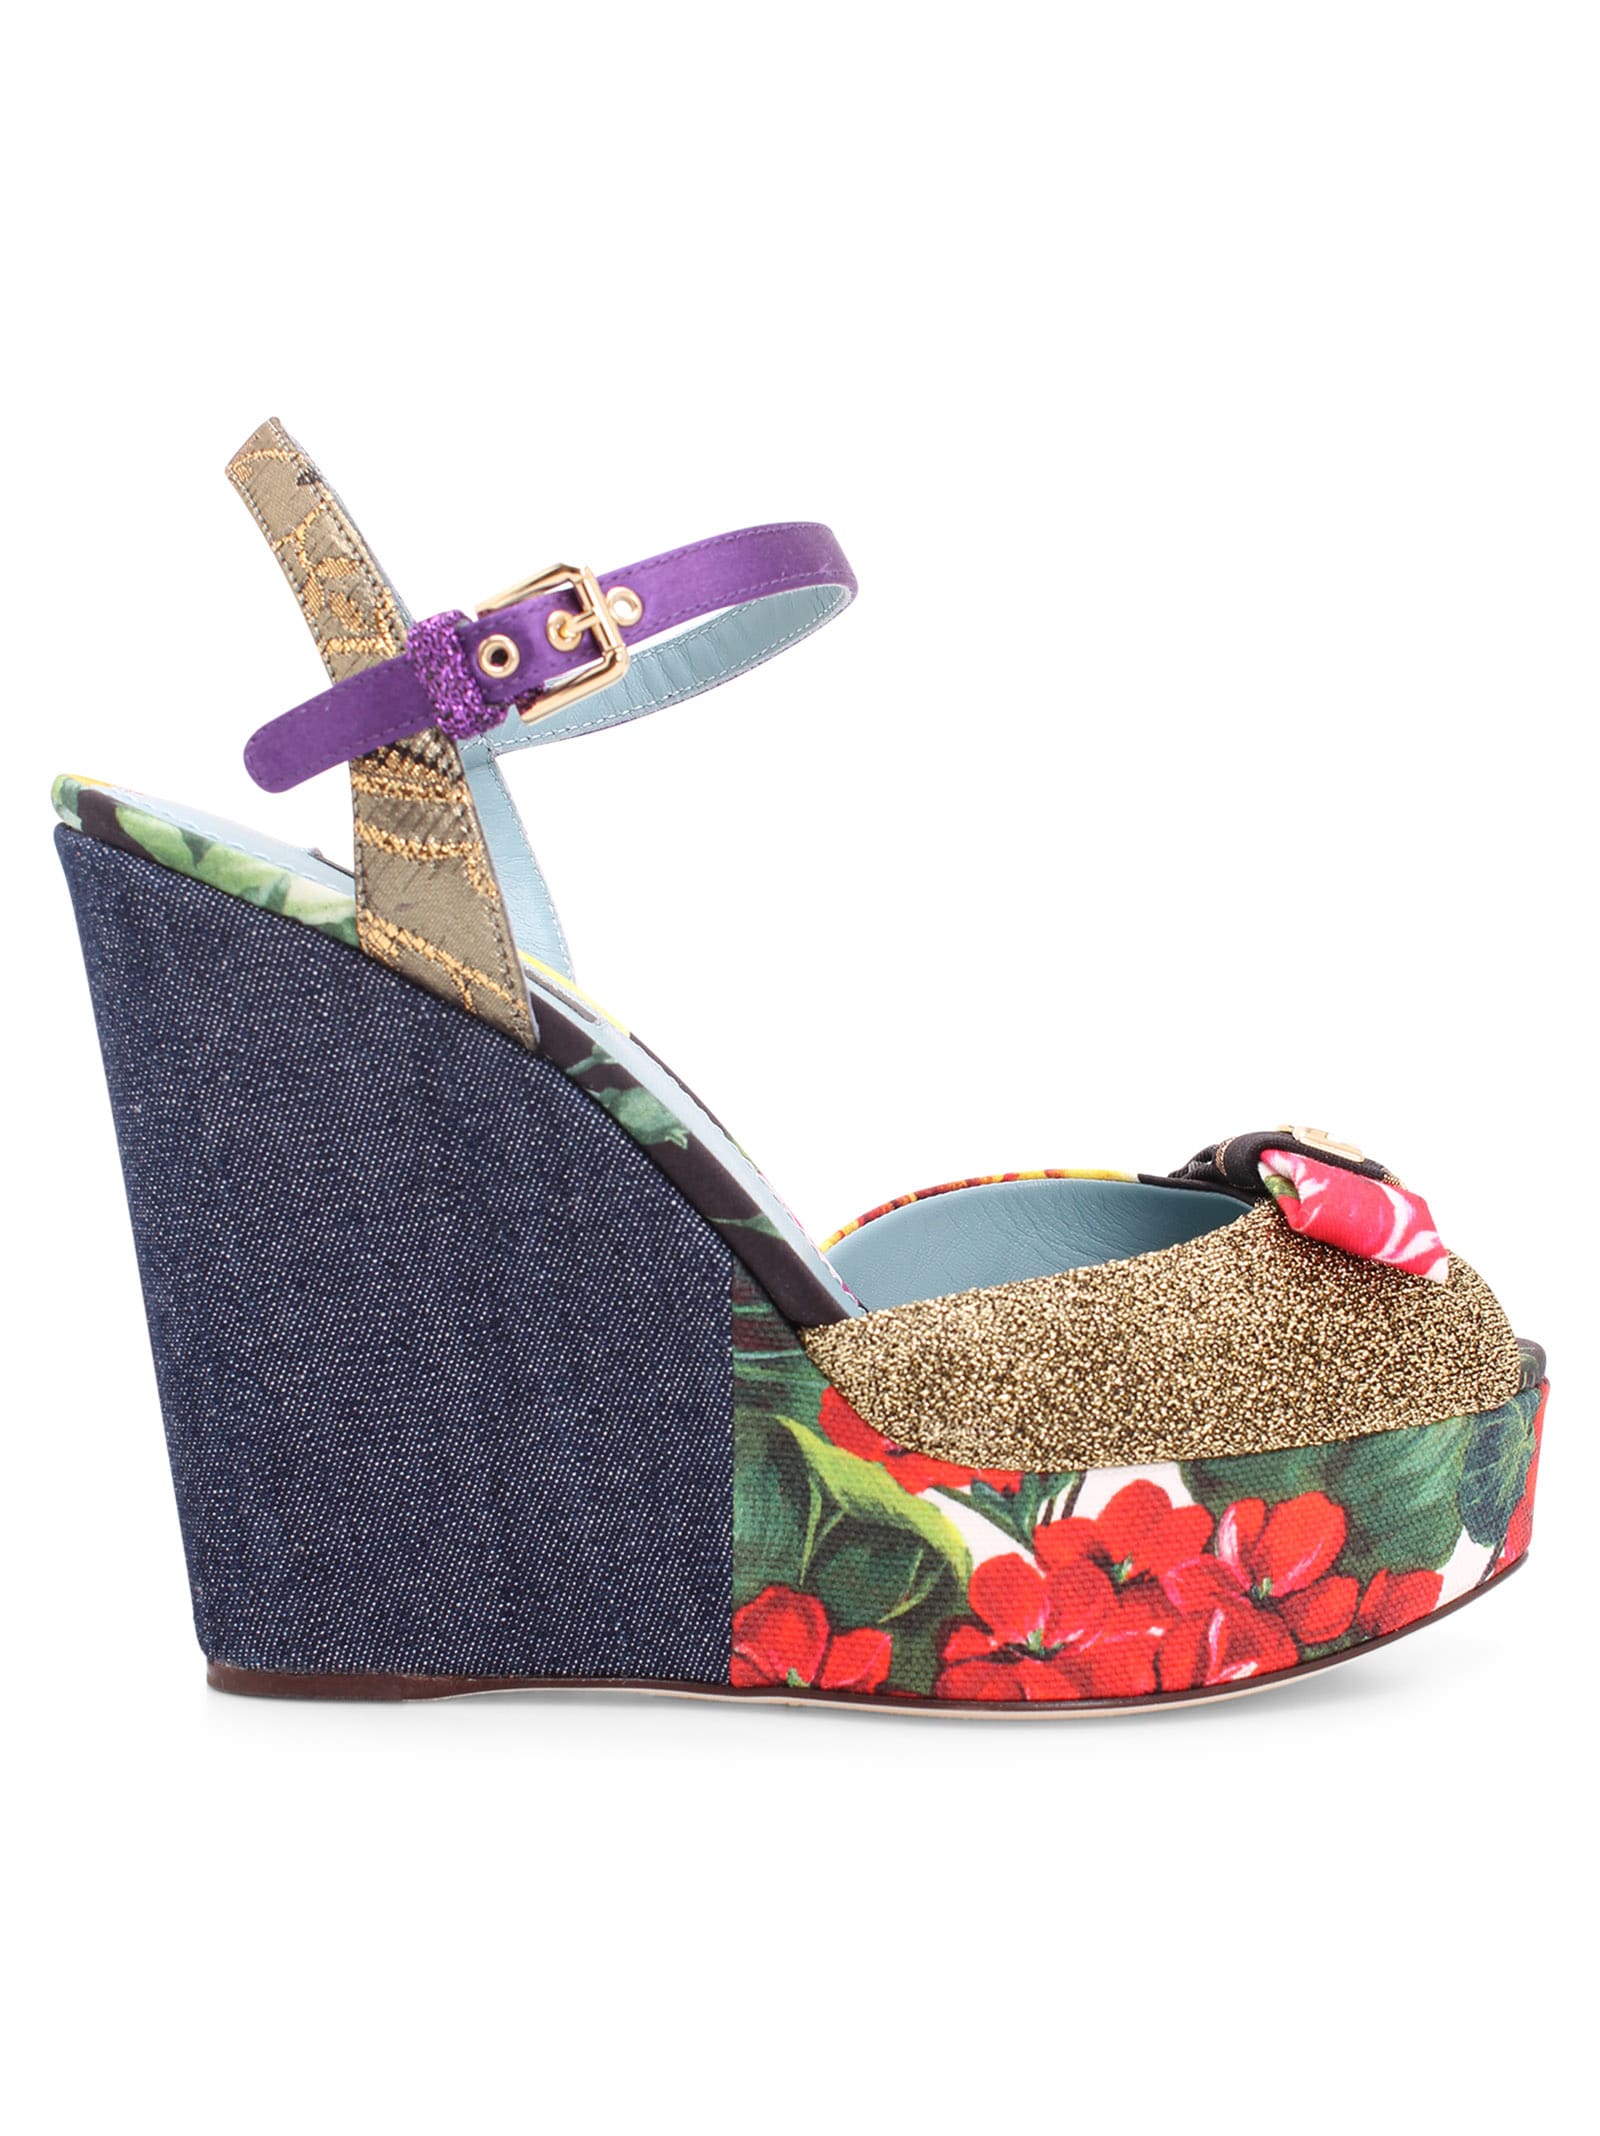 Buy Dolce & Gabbana patch 11 Cotton Wedge online, shop Dolce & Gabbana shoes with free shipping